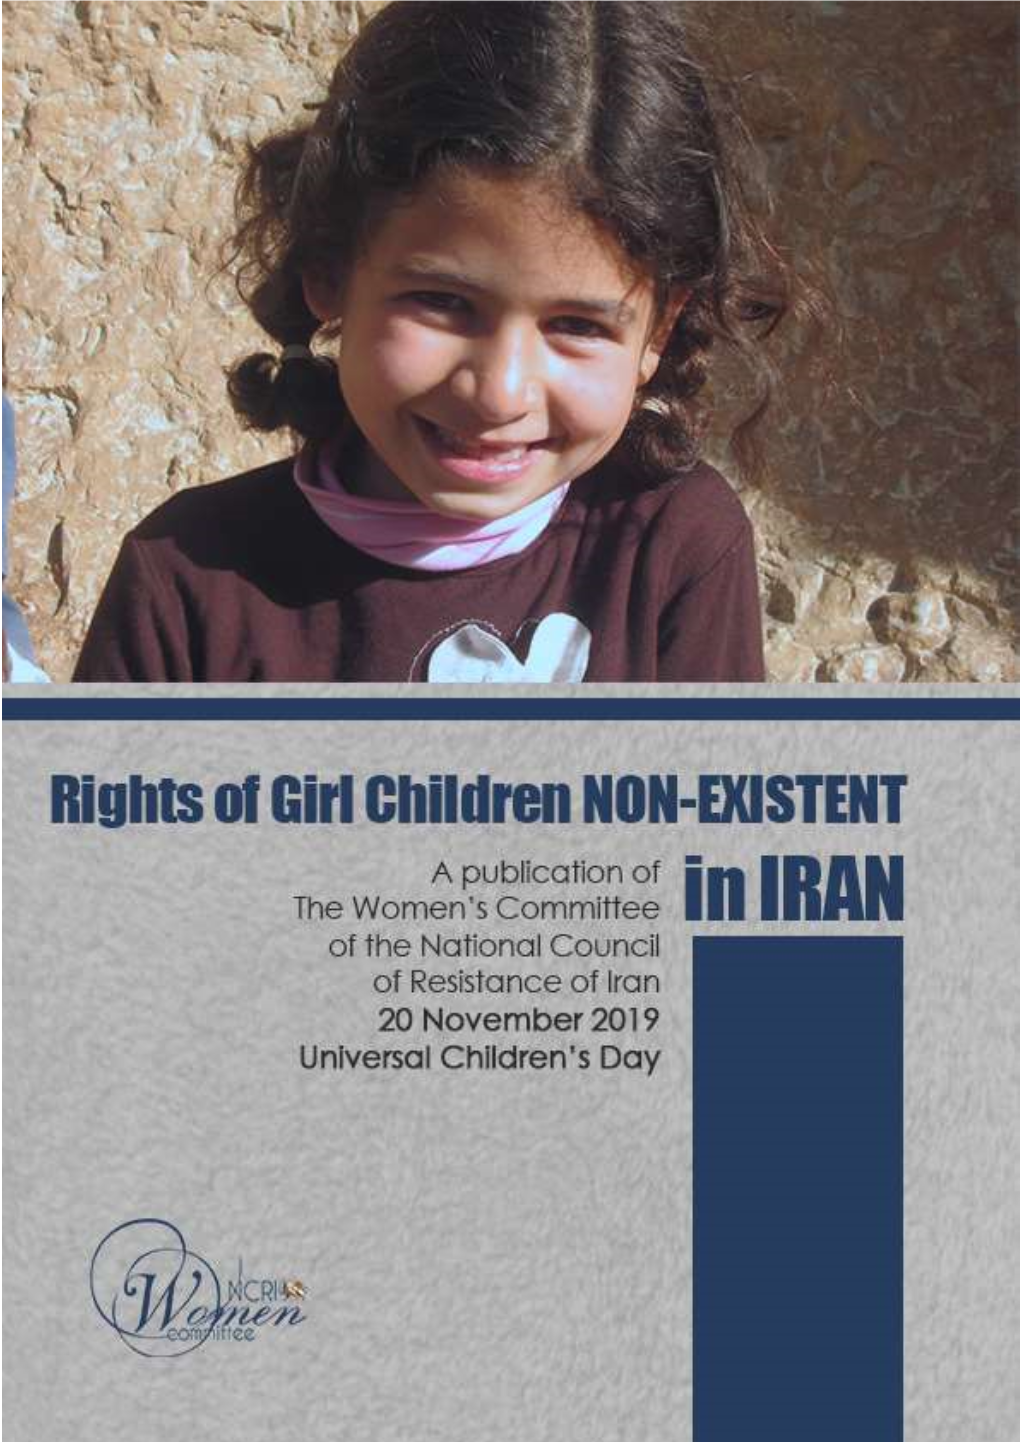 Rights of Girl Children Non-Existent in Iran